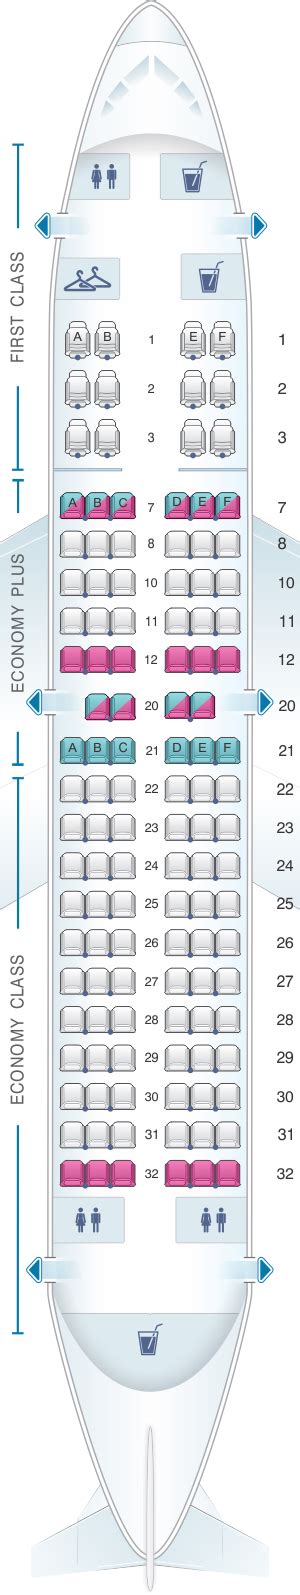 United 737 700 seat map. United Airlines United Airlines Boeing 737-700 First A B E F 1 2 3 Economy A B C D E F 5 6 7 8 9 10 12 14 15 16 17 18 19 20 21 22 23 24 25 Comments No comments for this plane … 